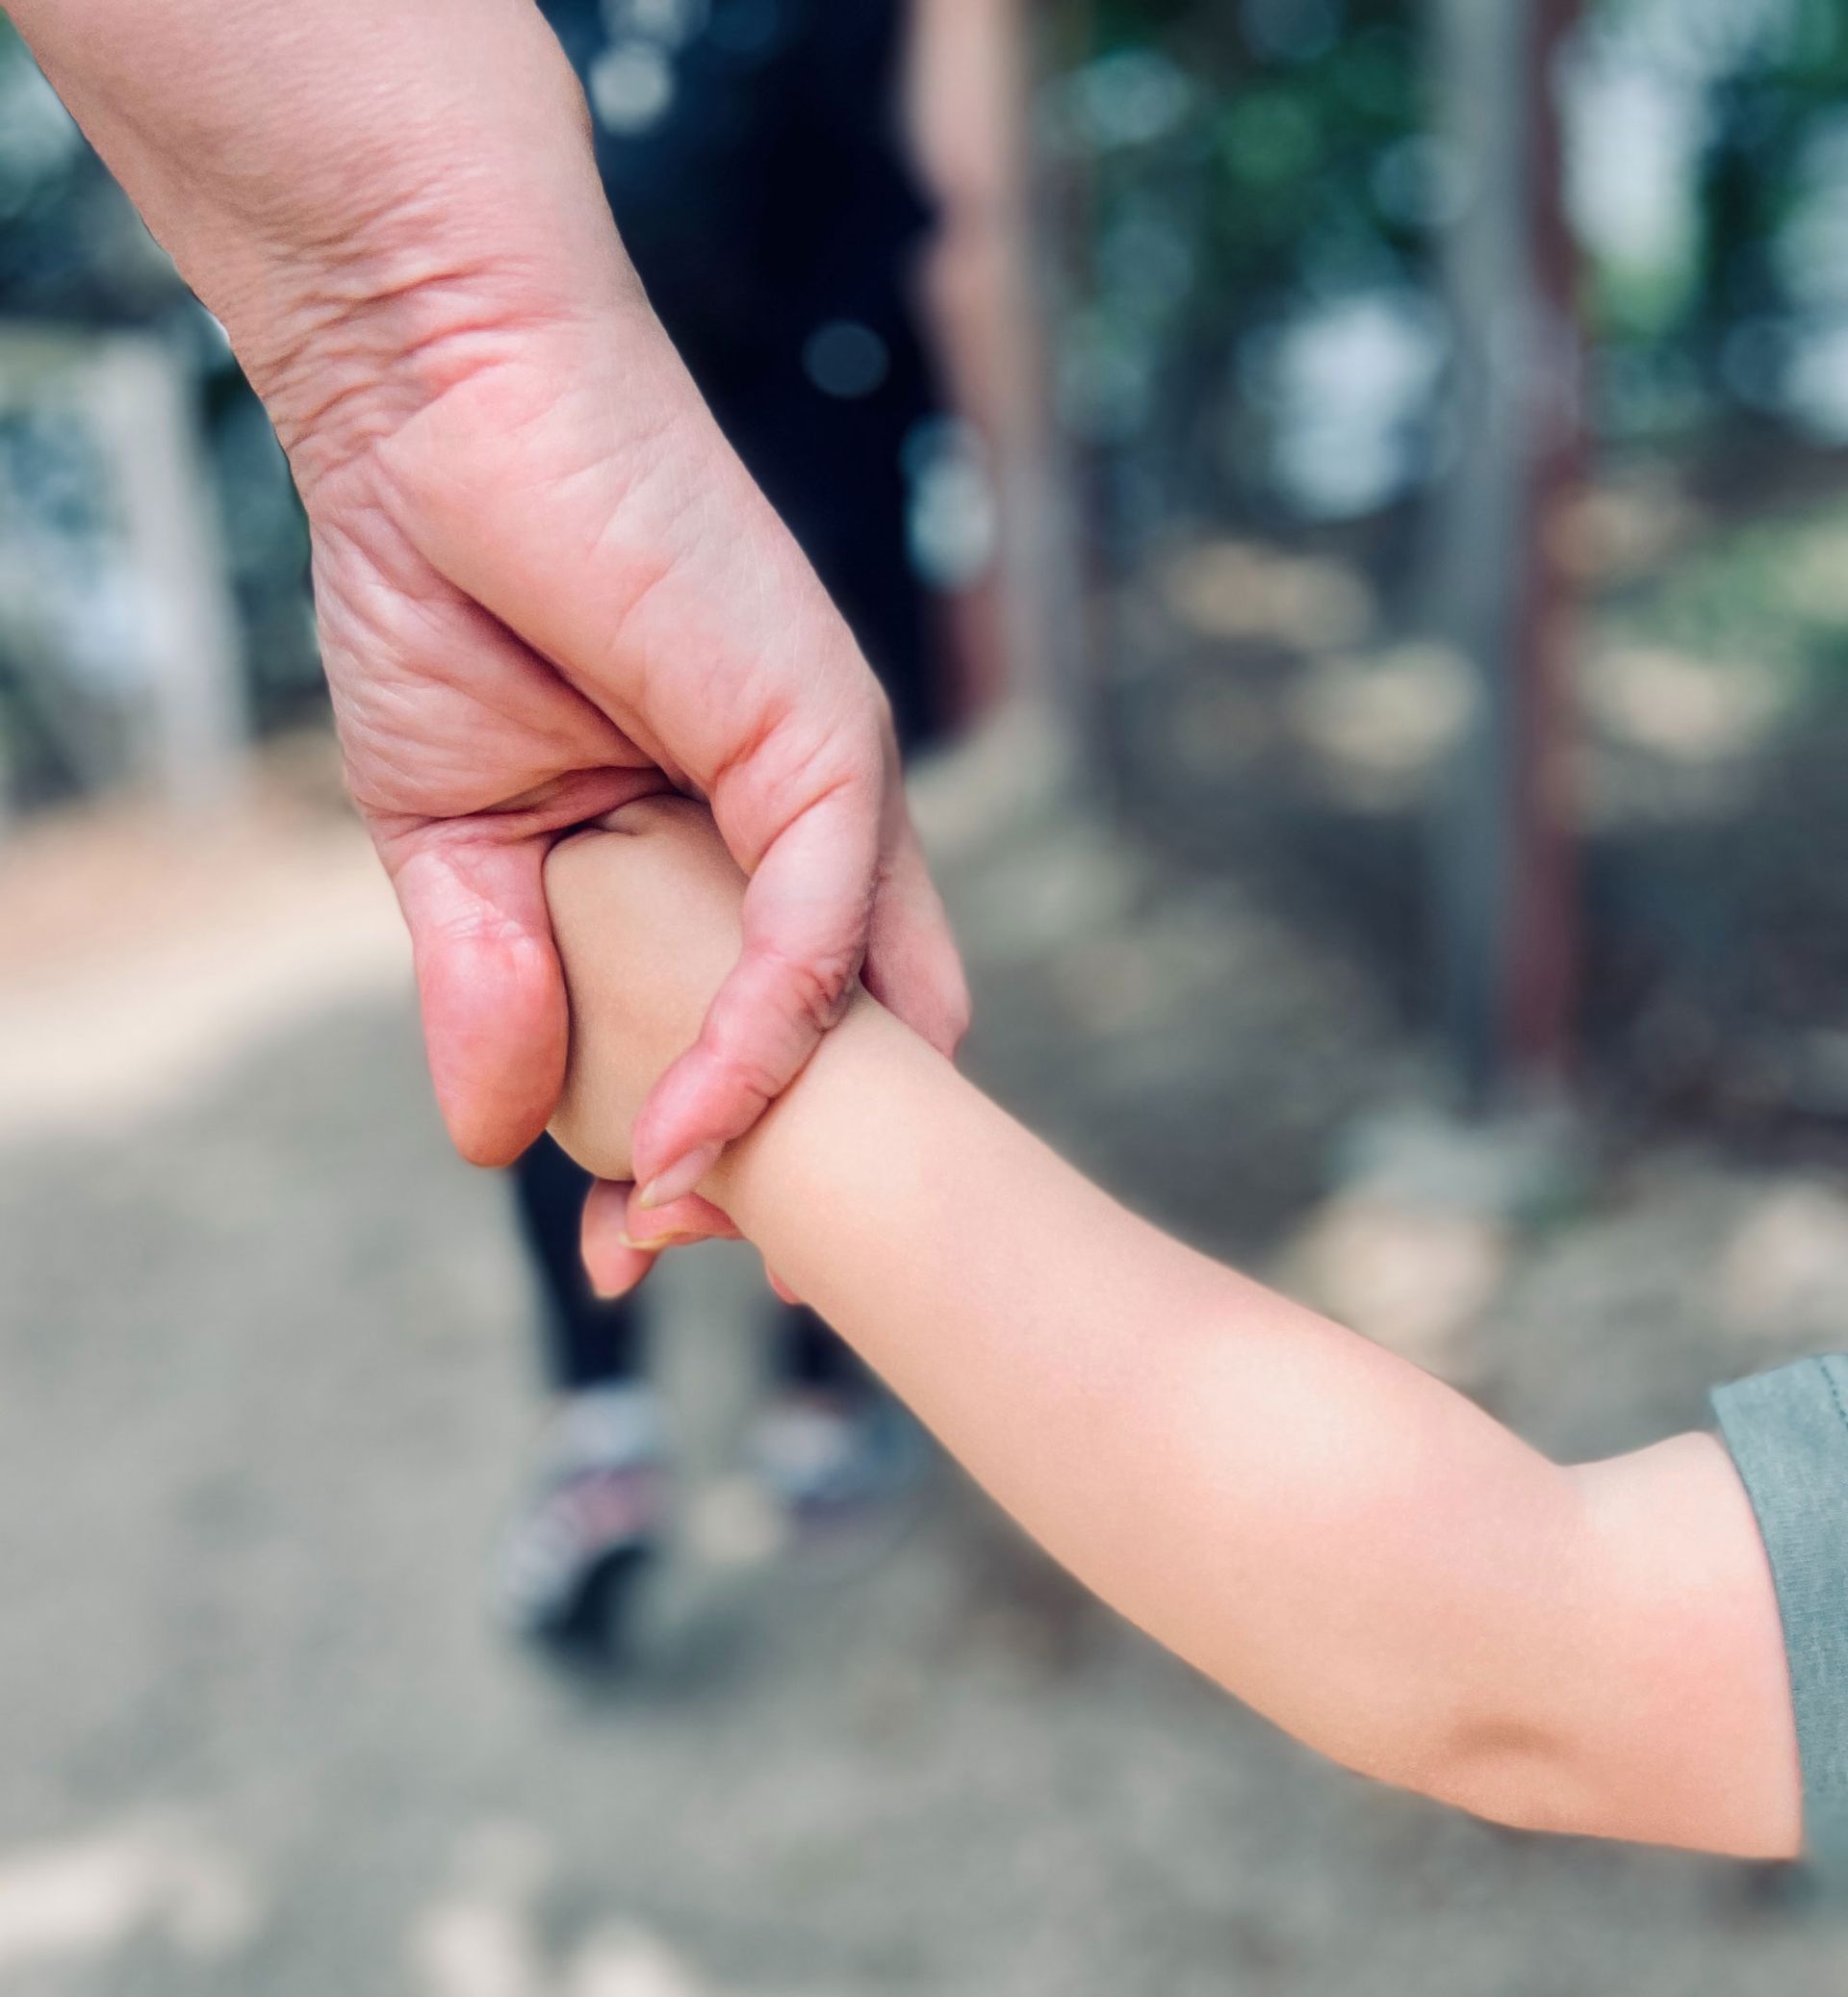 Adult hand holding a small child's hand with a blurry background